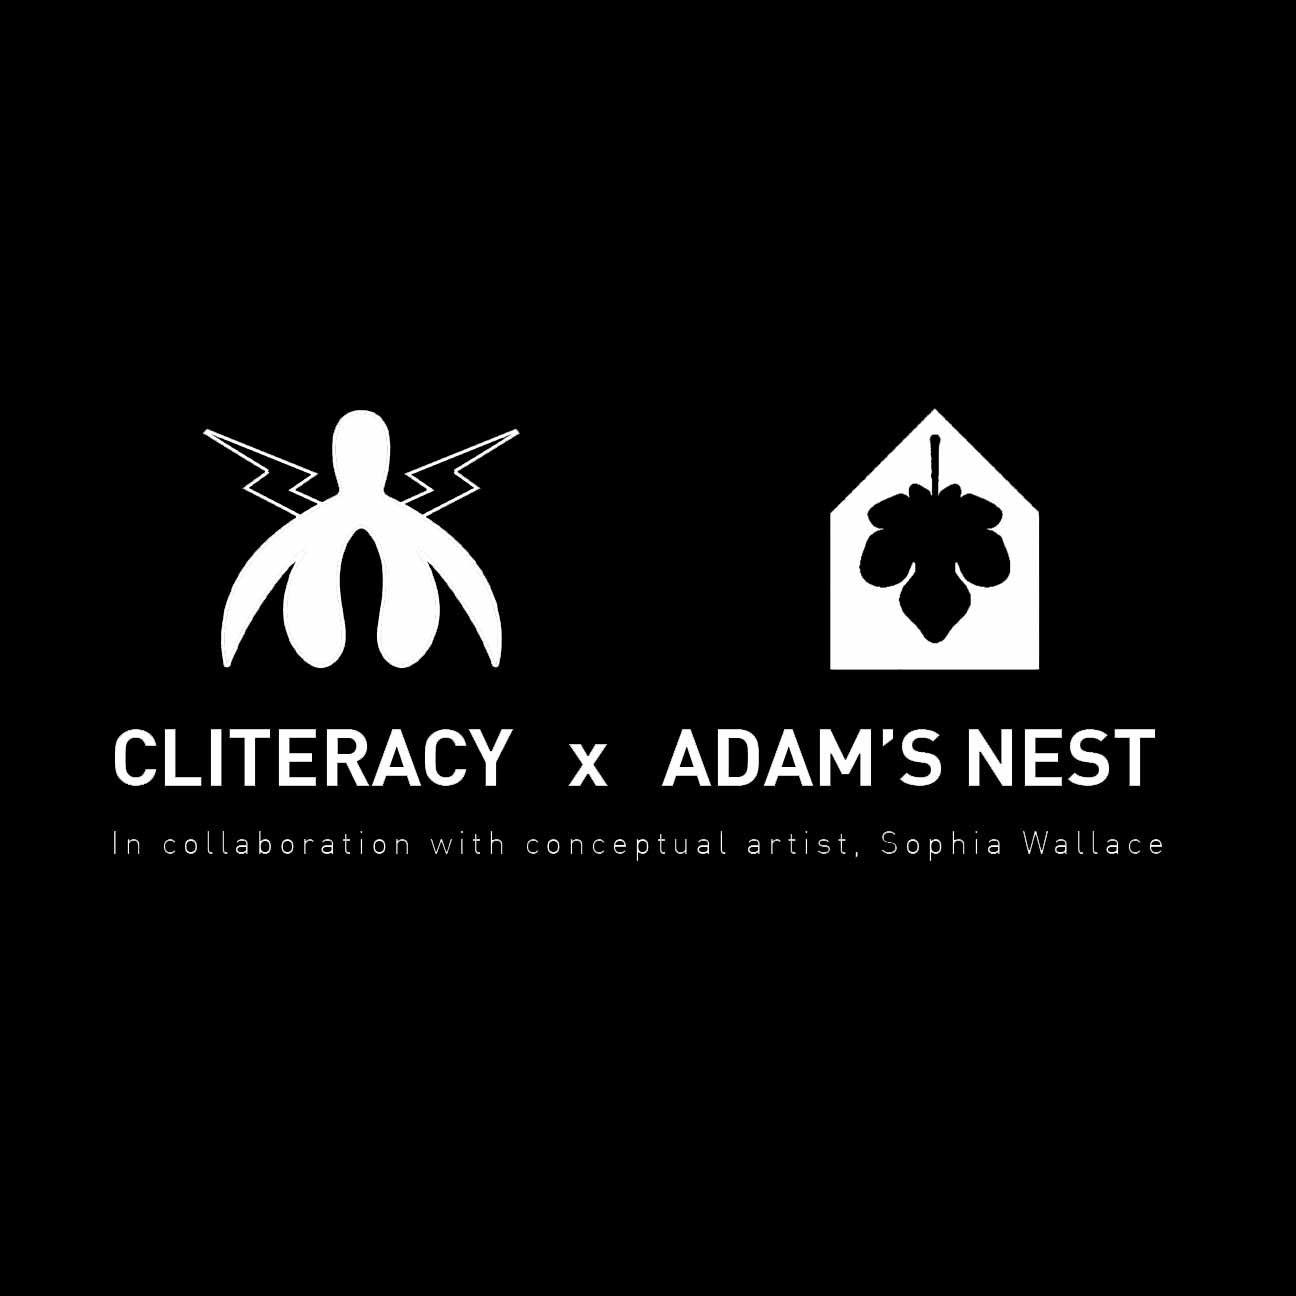 CLITERACY Sophia wallace and Adam's Nest